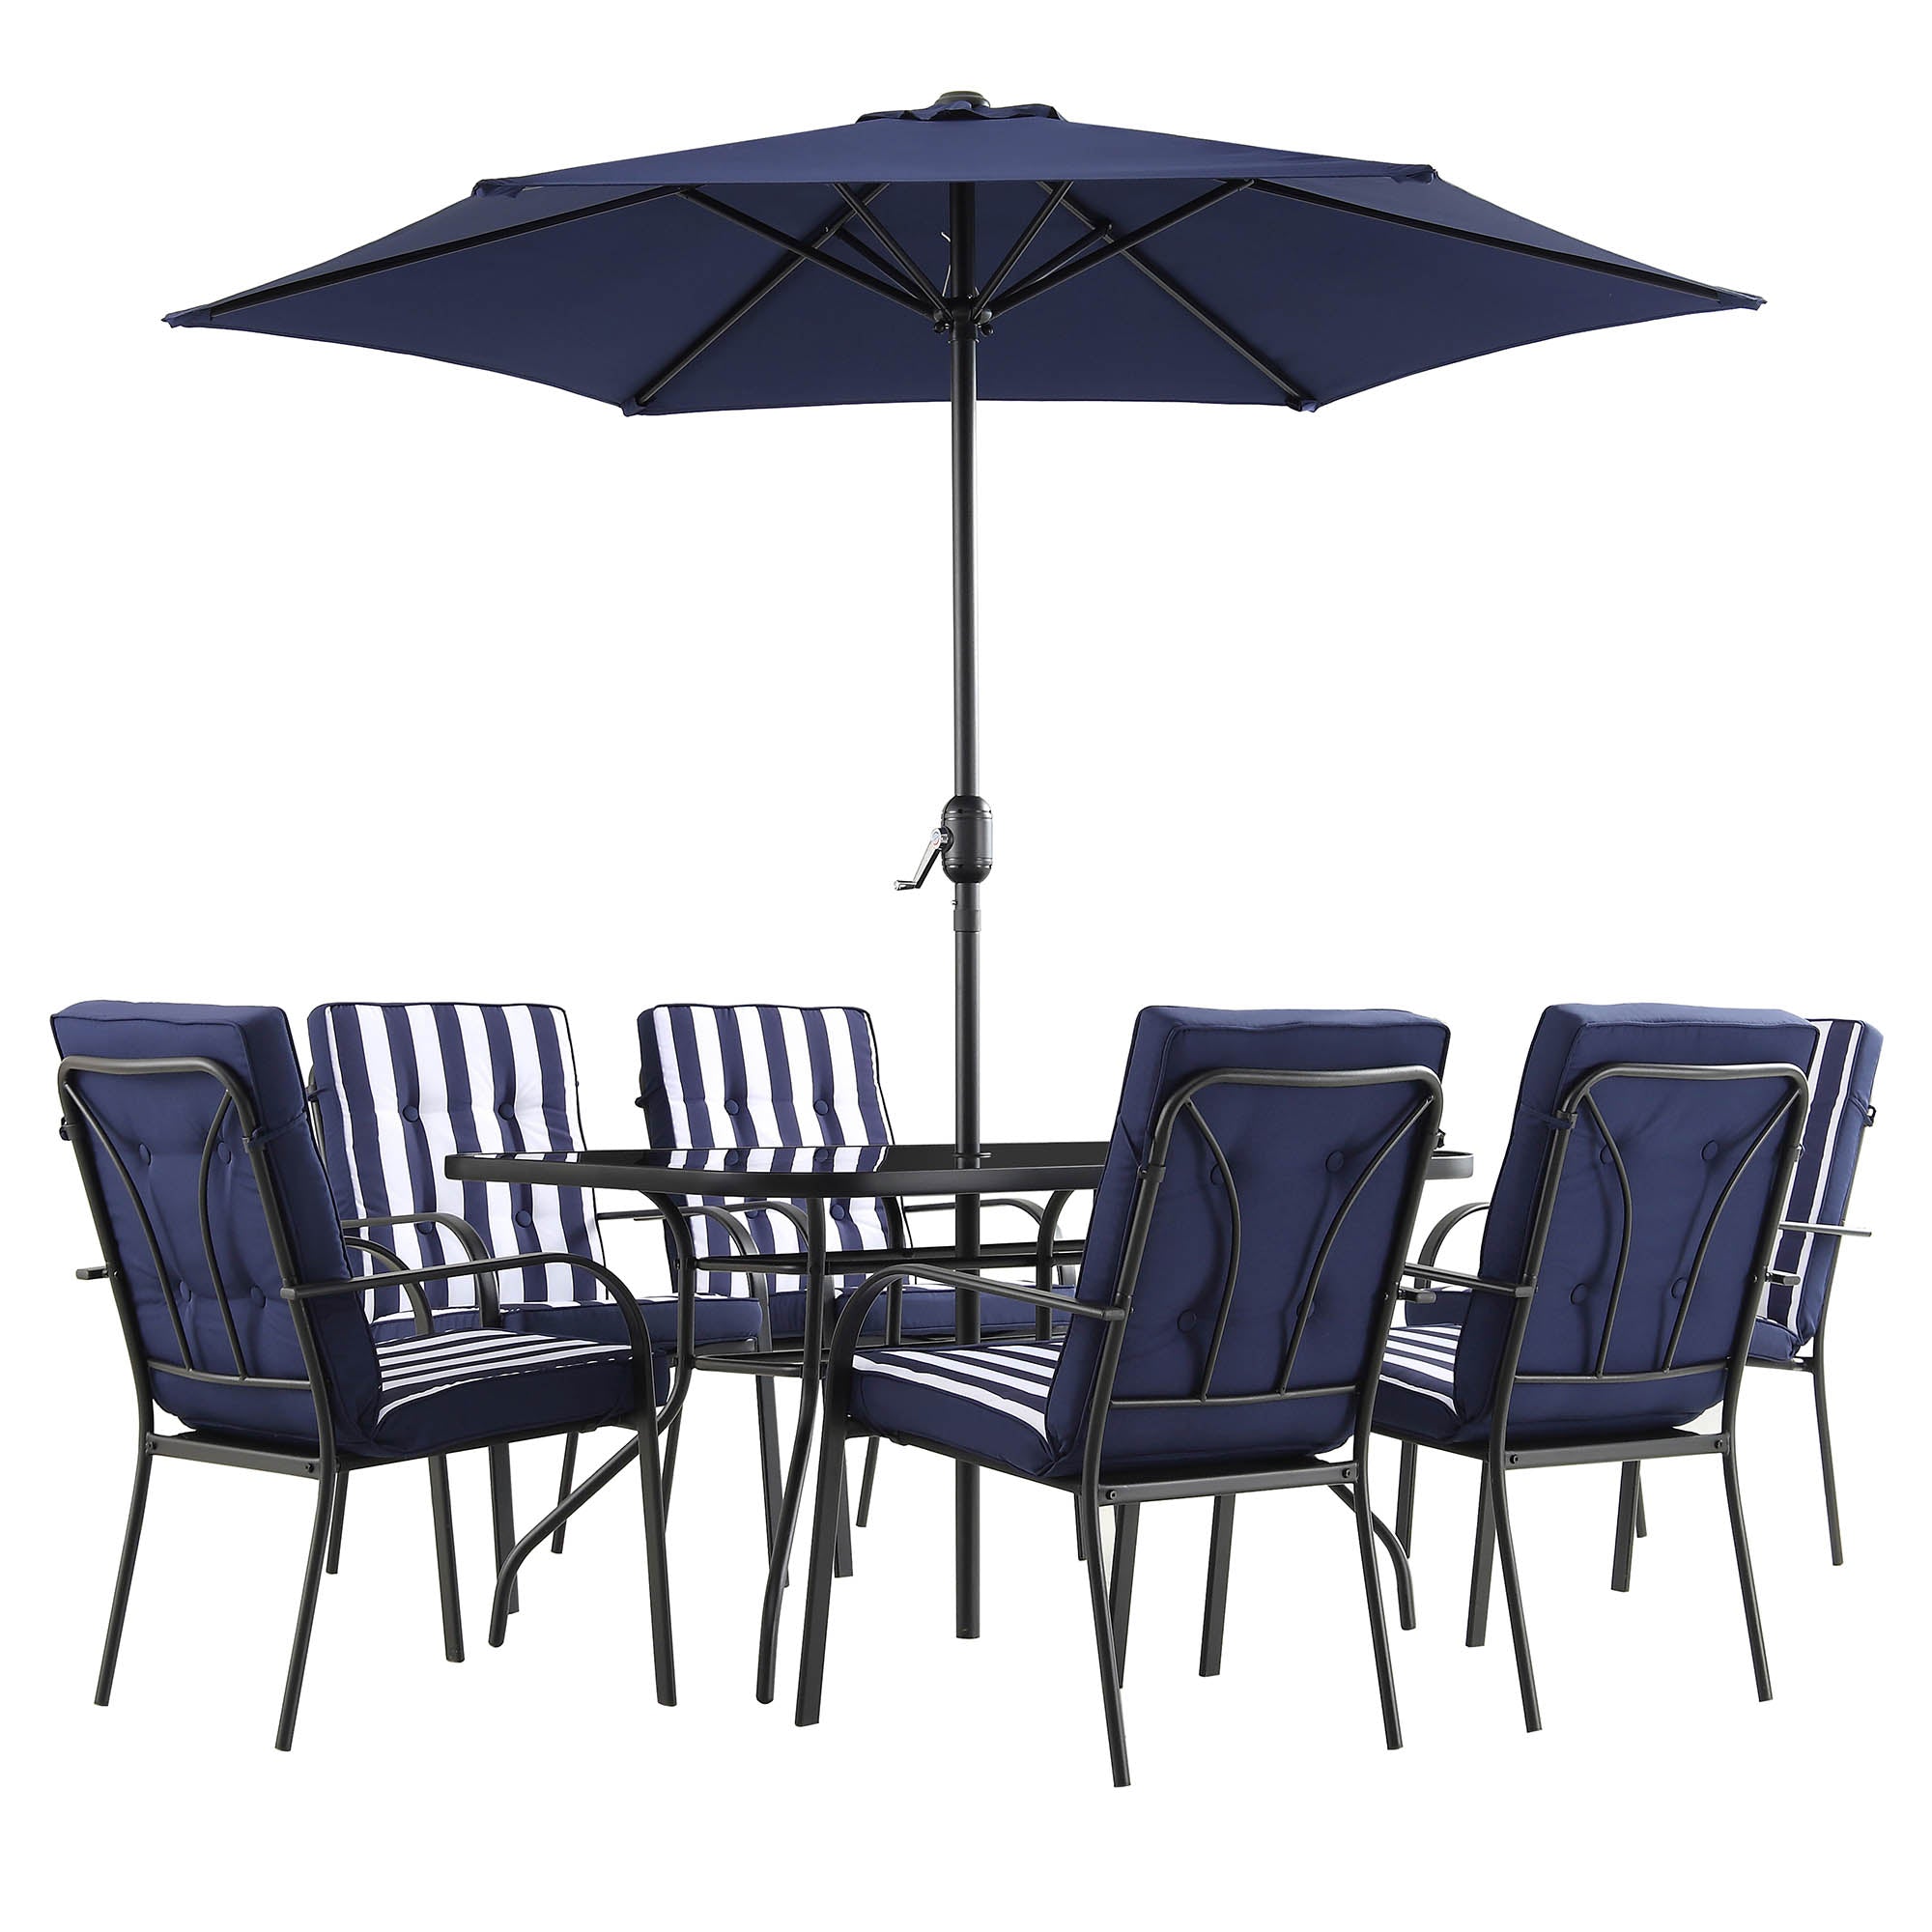 Champneys 6-Seater Steel and Fabric Outdoor Patio Dining Set with Crank Parasol, Blue